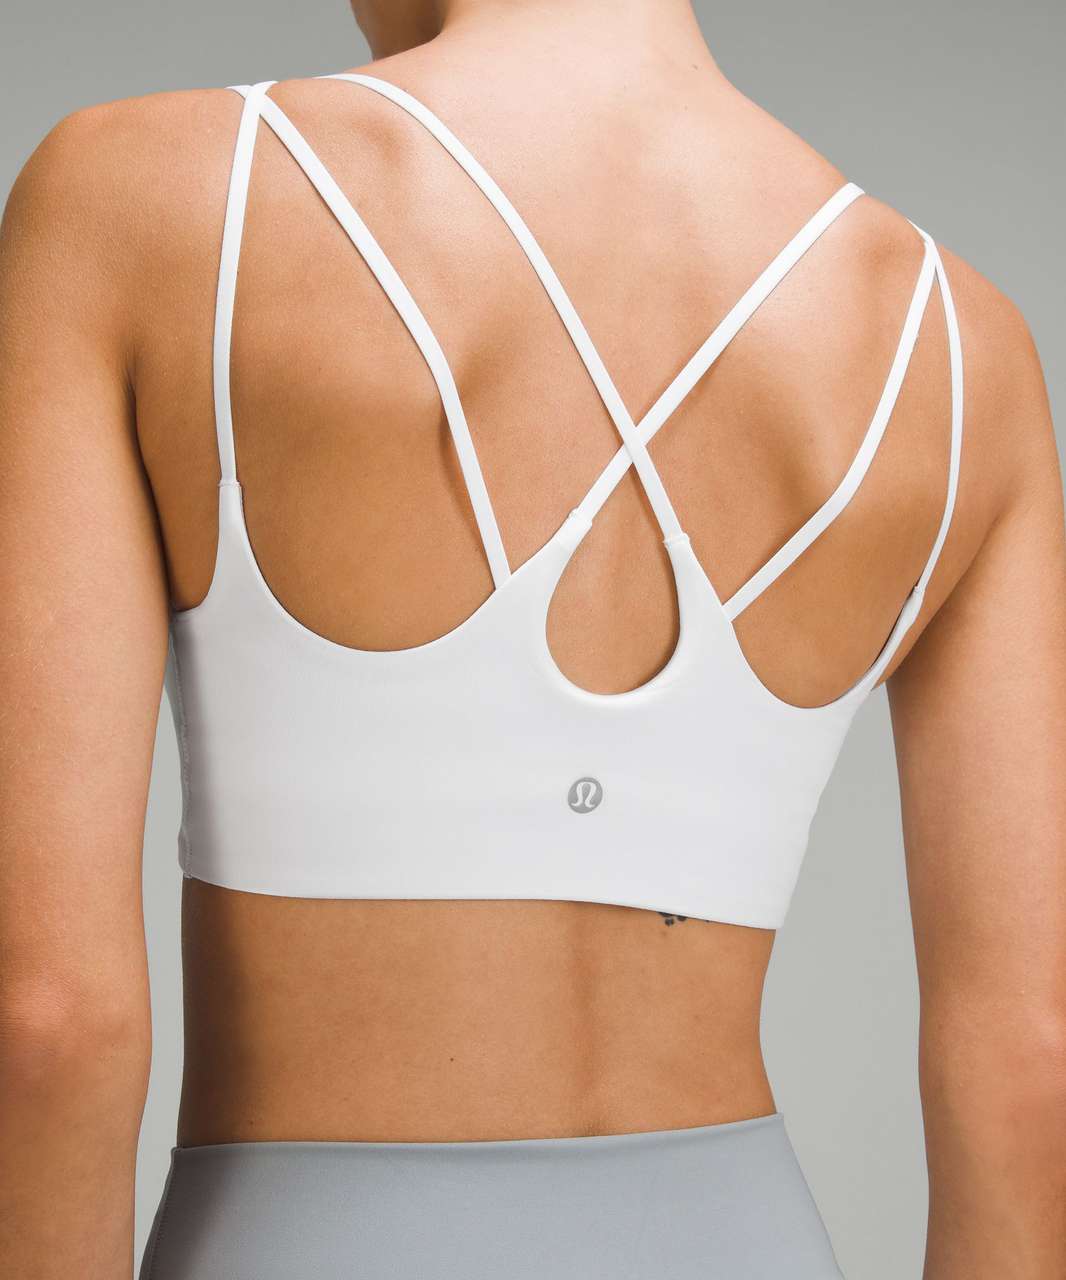 Lululemon Nulu Strappy Yoga Bra *Light Support, A/B Cup - White